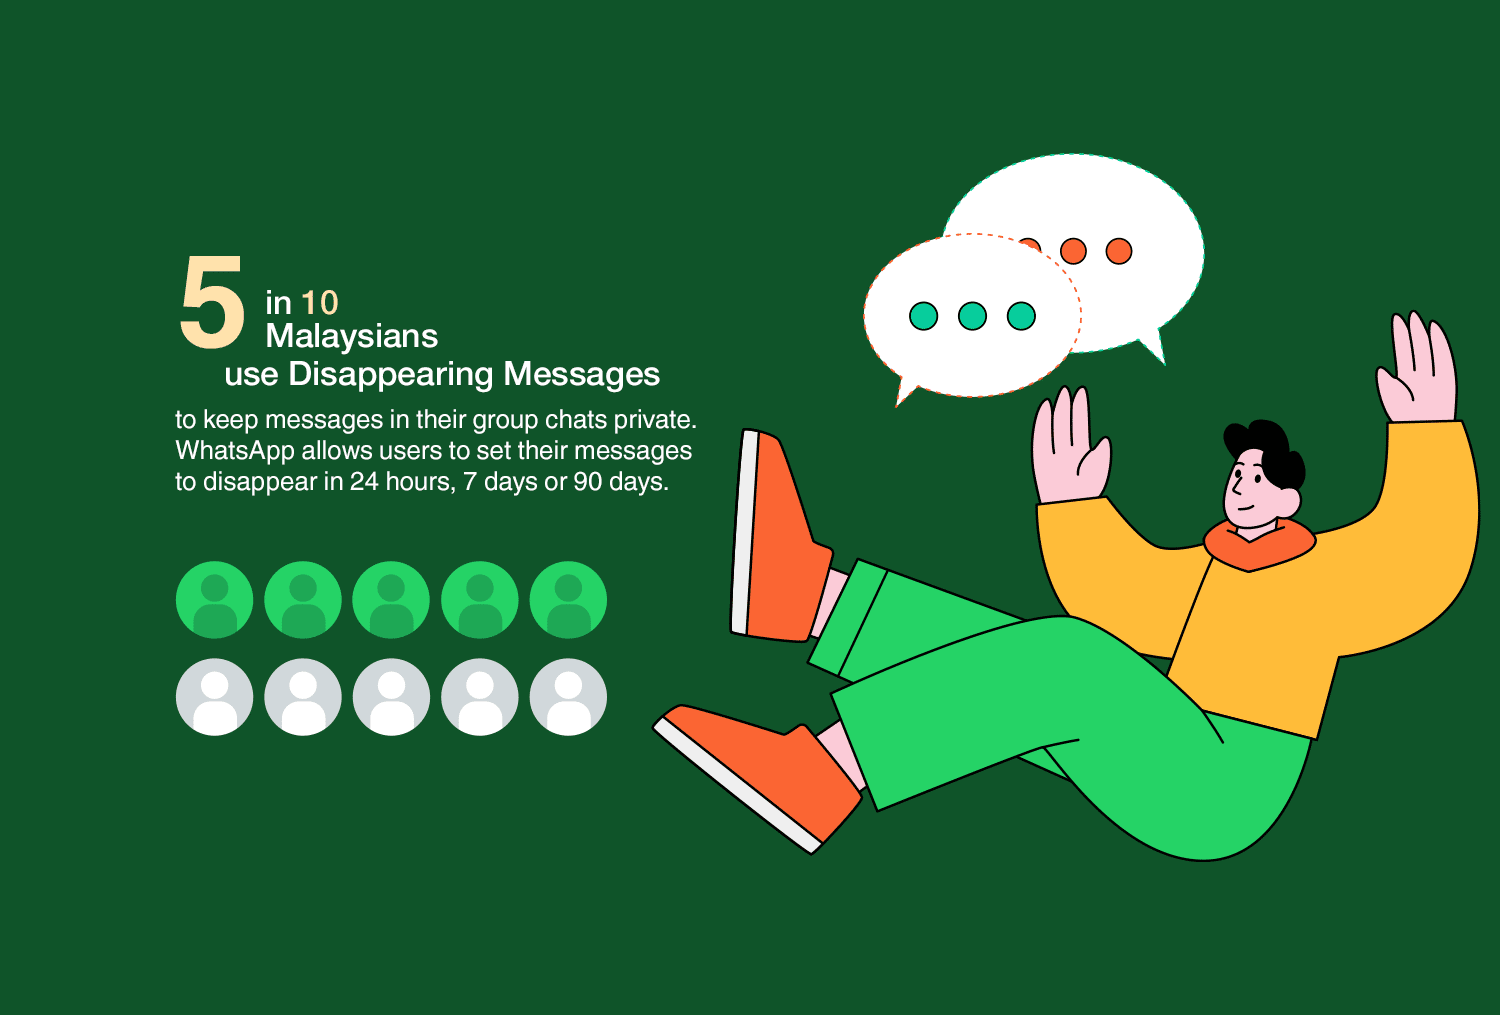 Only 3 Out Of 10 Malaysians Make Use Of Privacy Features In Messaging Apps, Says WhatsApp 30